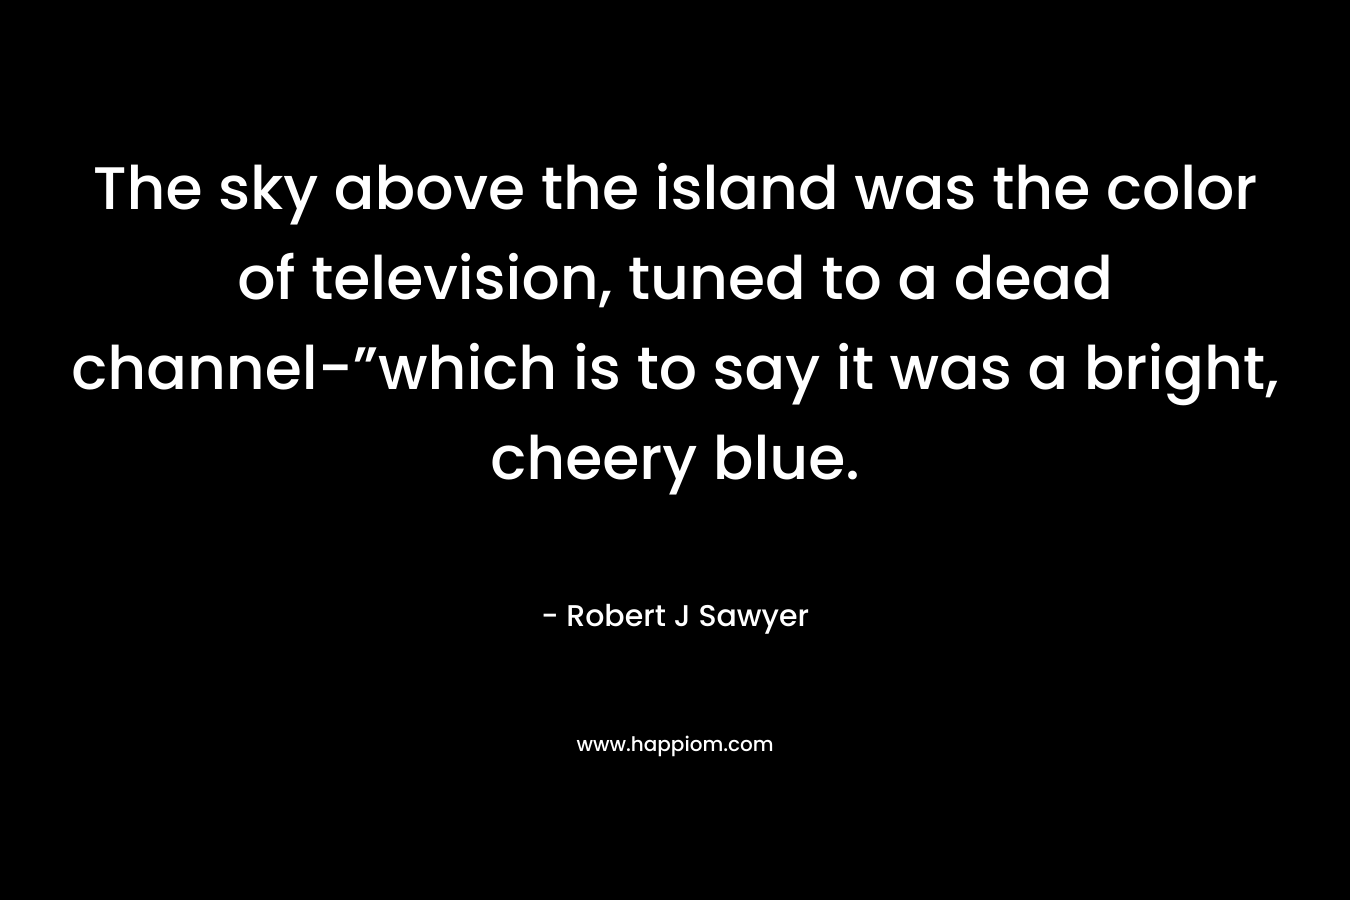 The sky above the island was the color of television, tuned to a dead channel-”which is to say it was a bright, cheery blue. – Robert J Sawyer